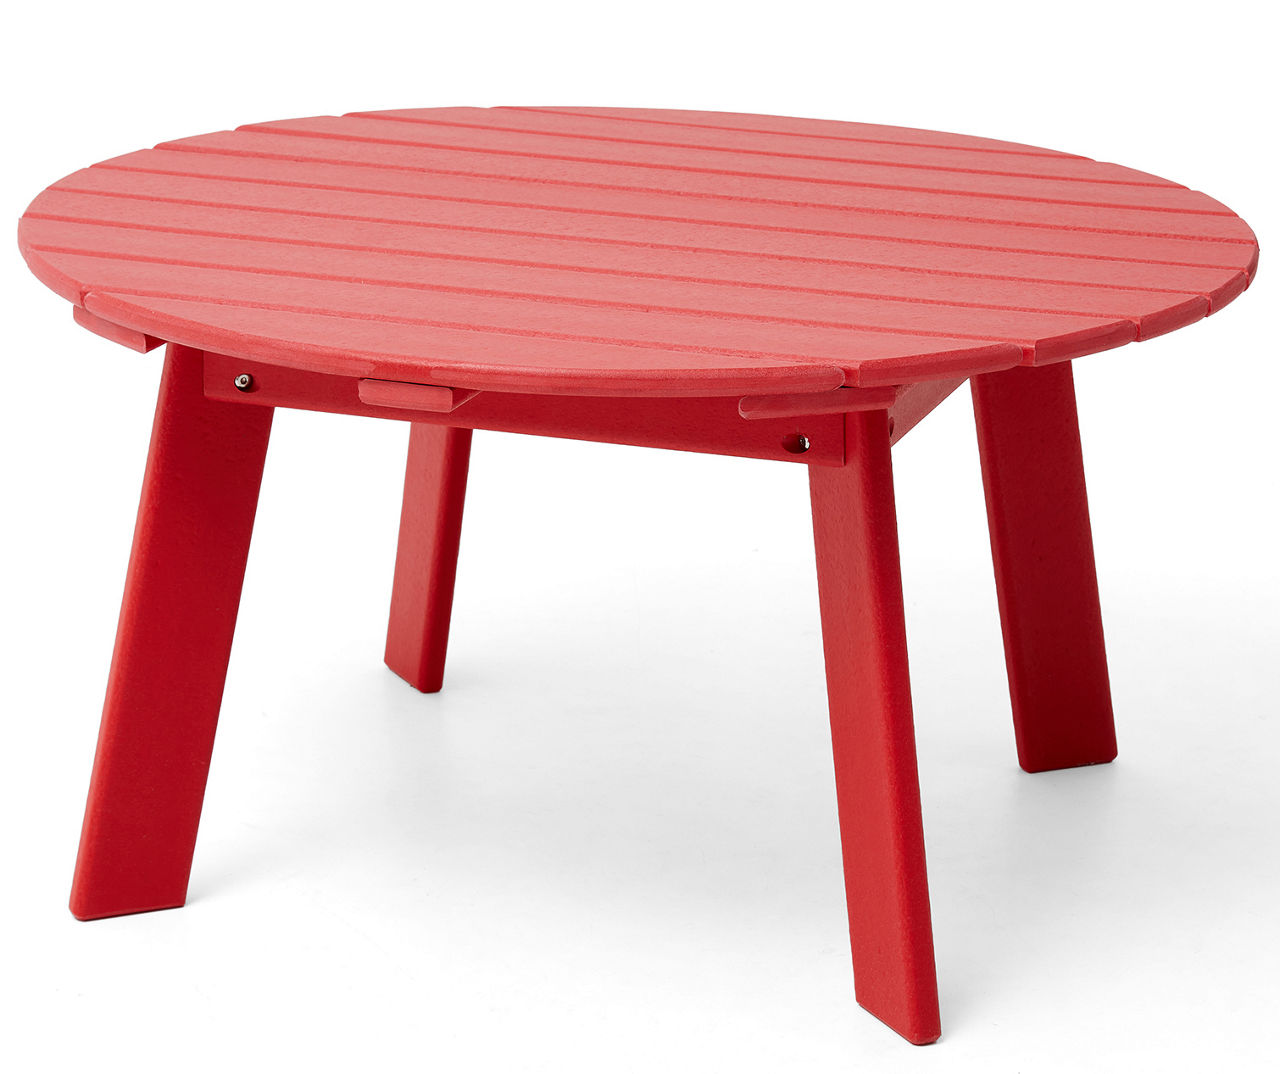 35.5" Red Adirondack Outdoor Coffee Table